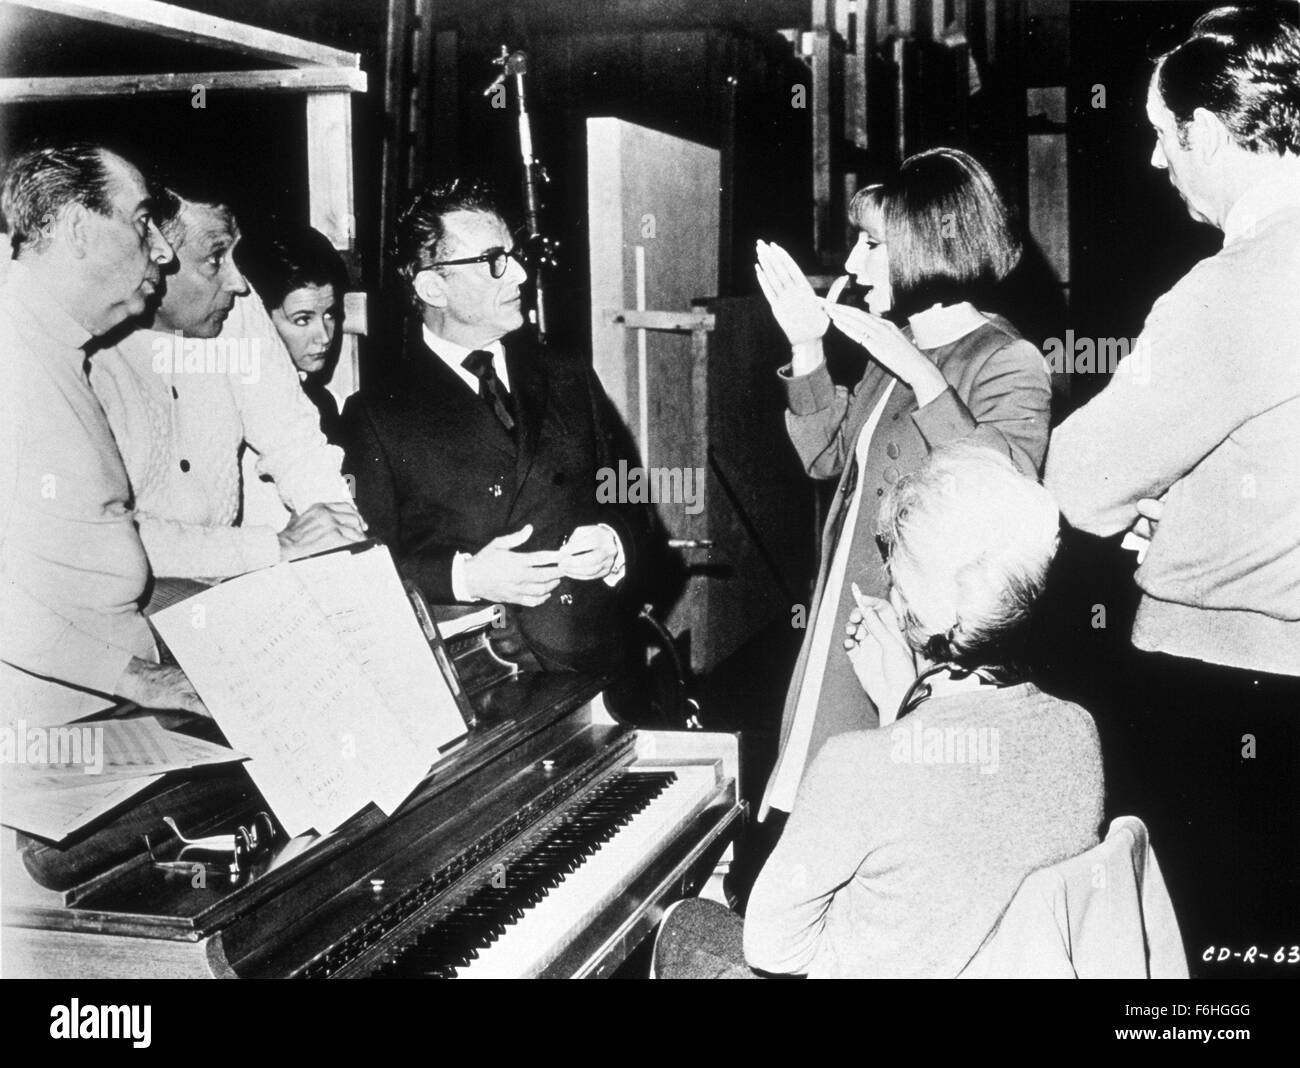 1970, Film Title: ON A CLEAR DAY YOU CAN SEE FOREVER, Director: VINCENTE MINNELLI, Studio: MGM, Pictured: ENSEMBLE, ALAN JAY LERNER, VINCENTE MINNELLI, YVES MONTAND, REHEARSING. (Credit Image: SNAP) Stock Photo